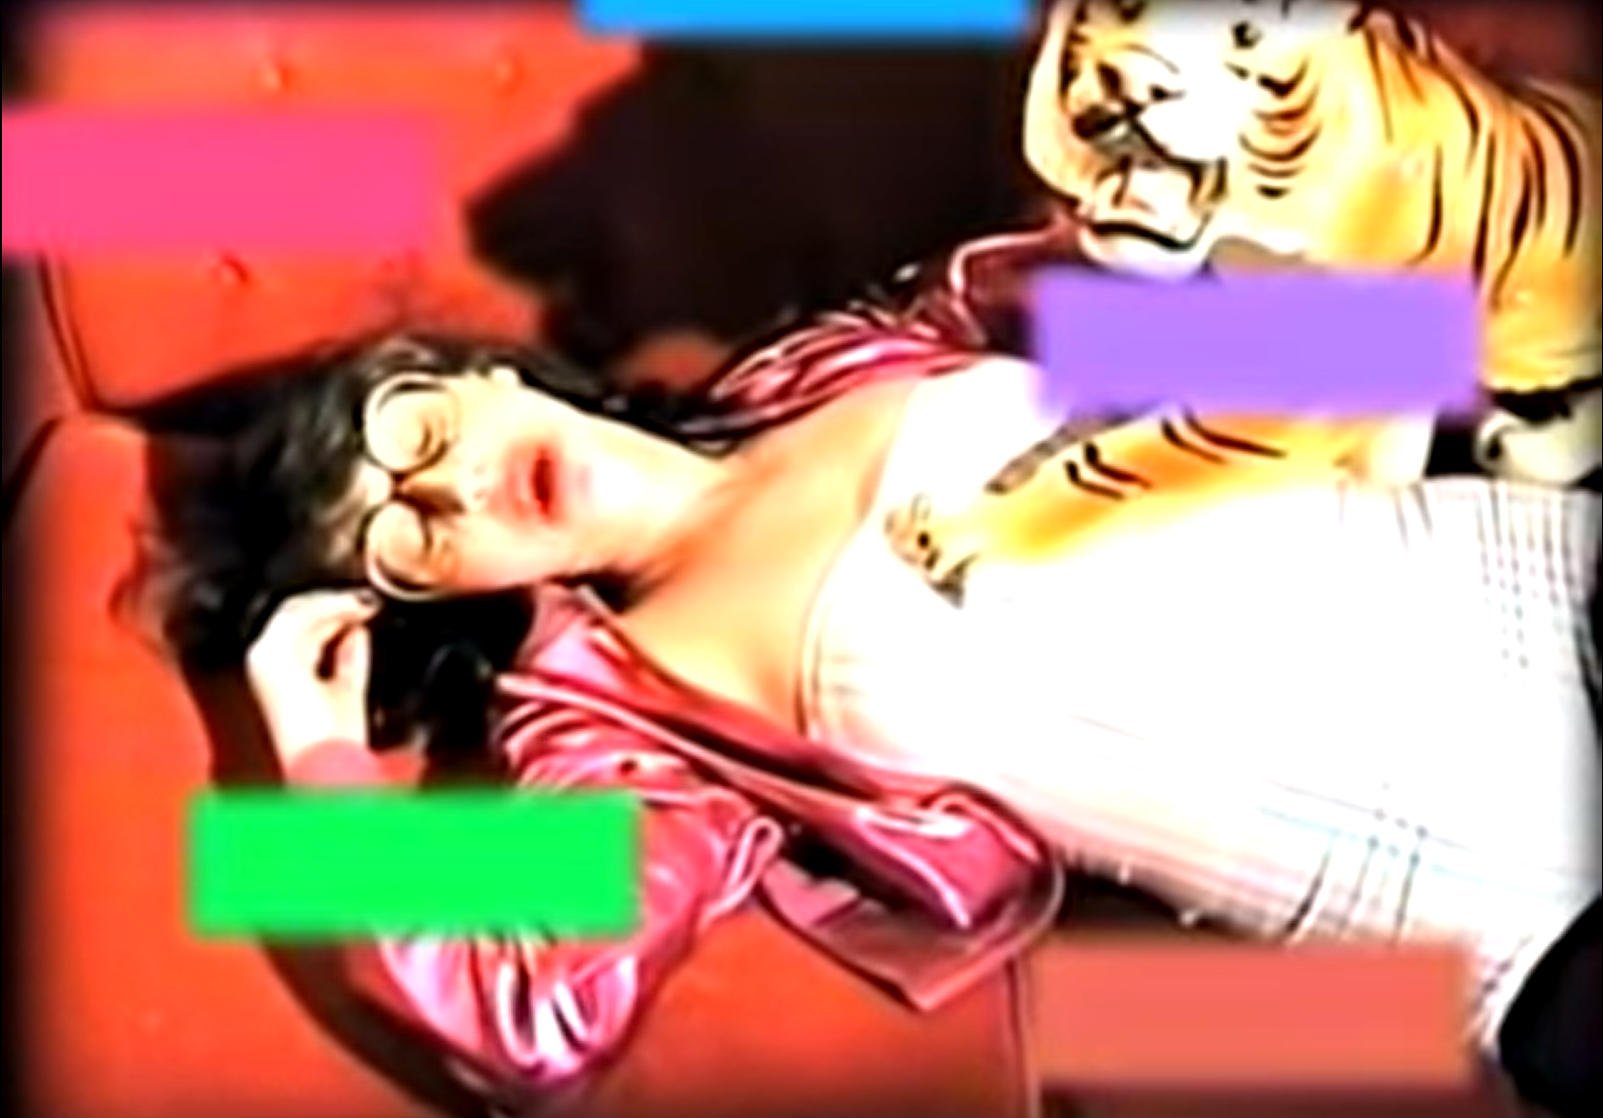 A still from a heavily edited video, where a young woman sings and writhes on her bed while strips of color float over her